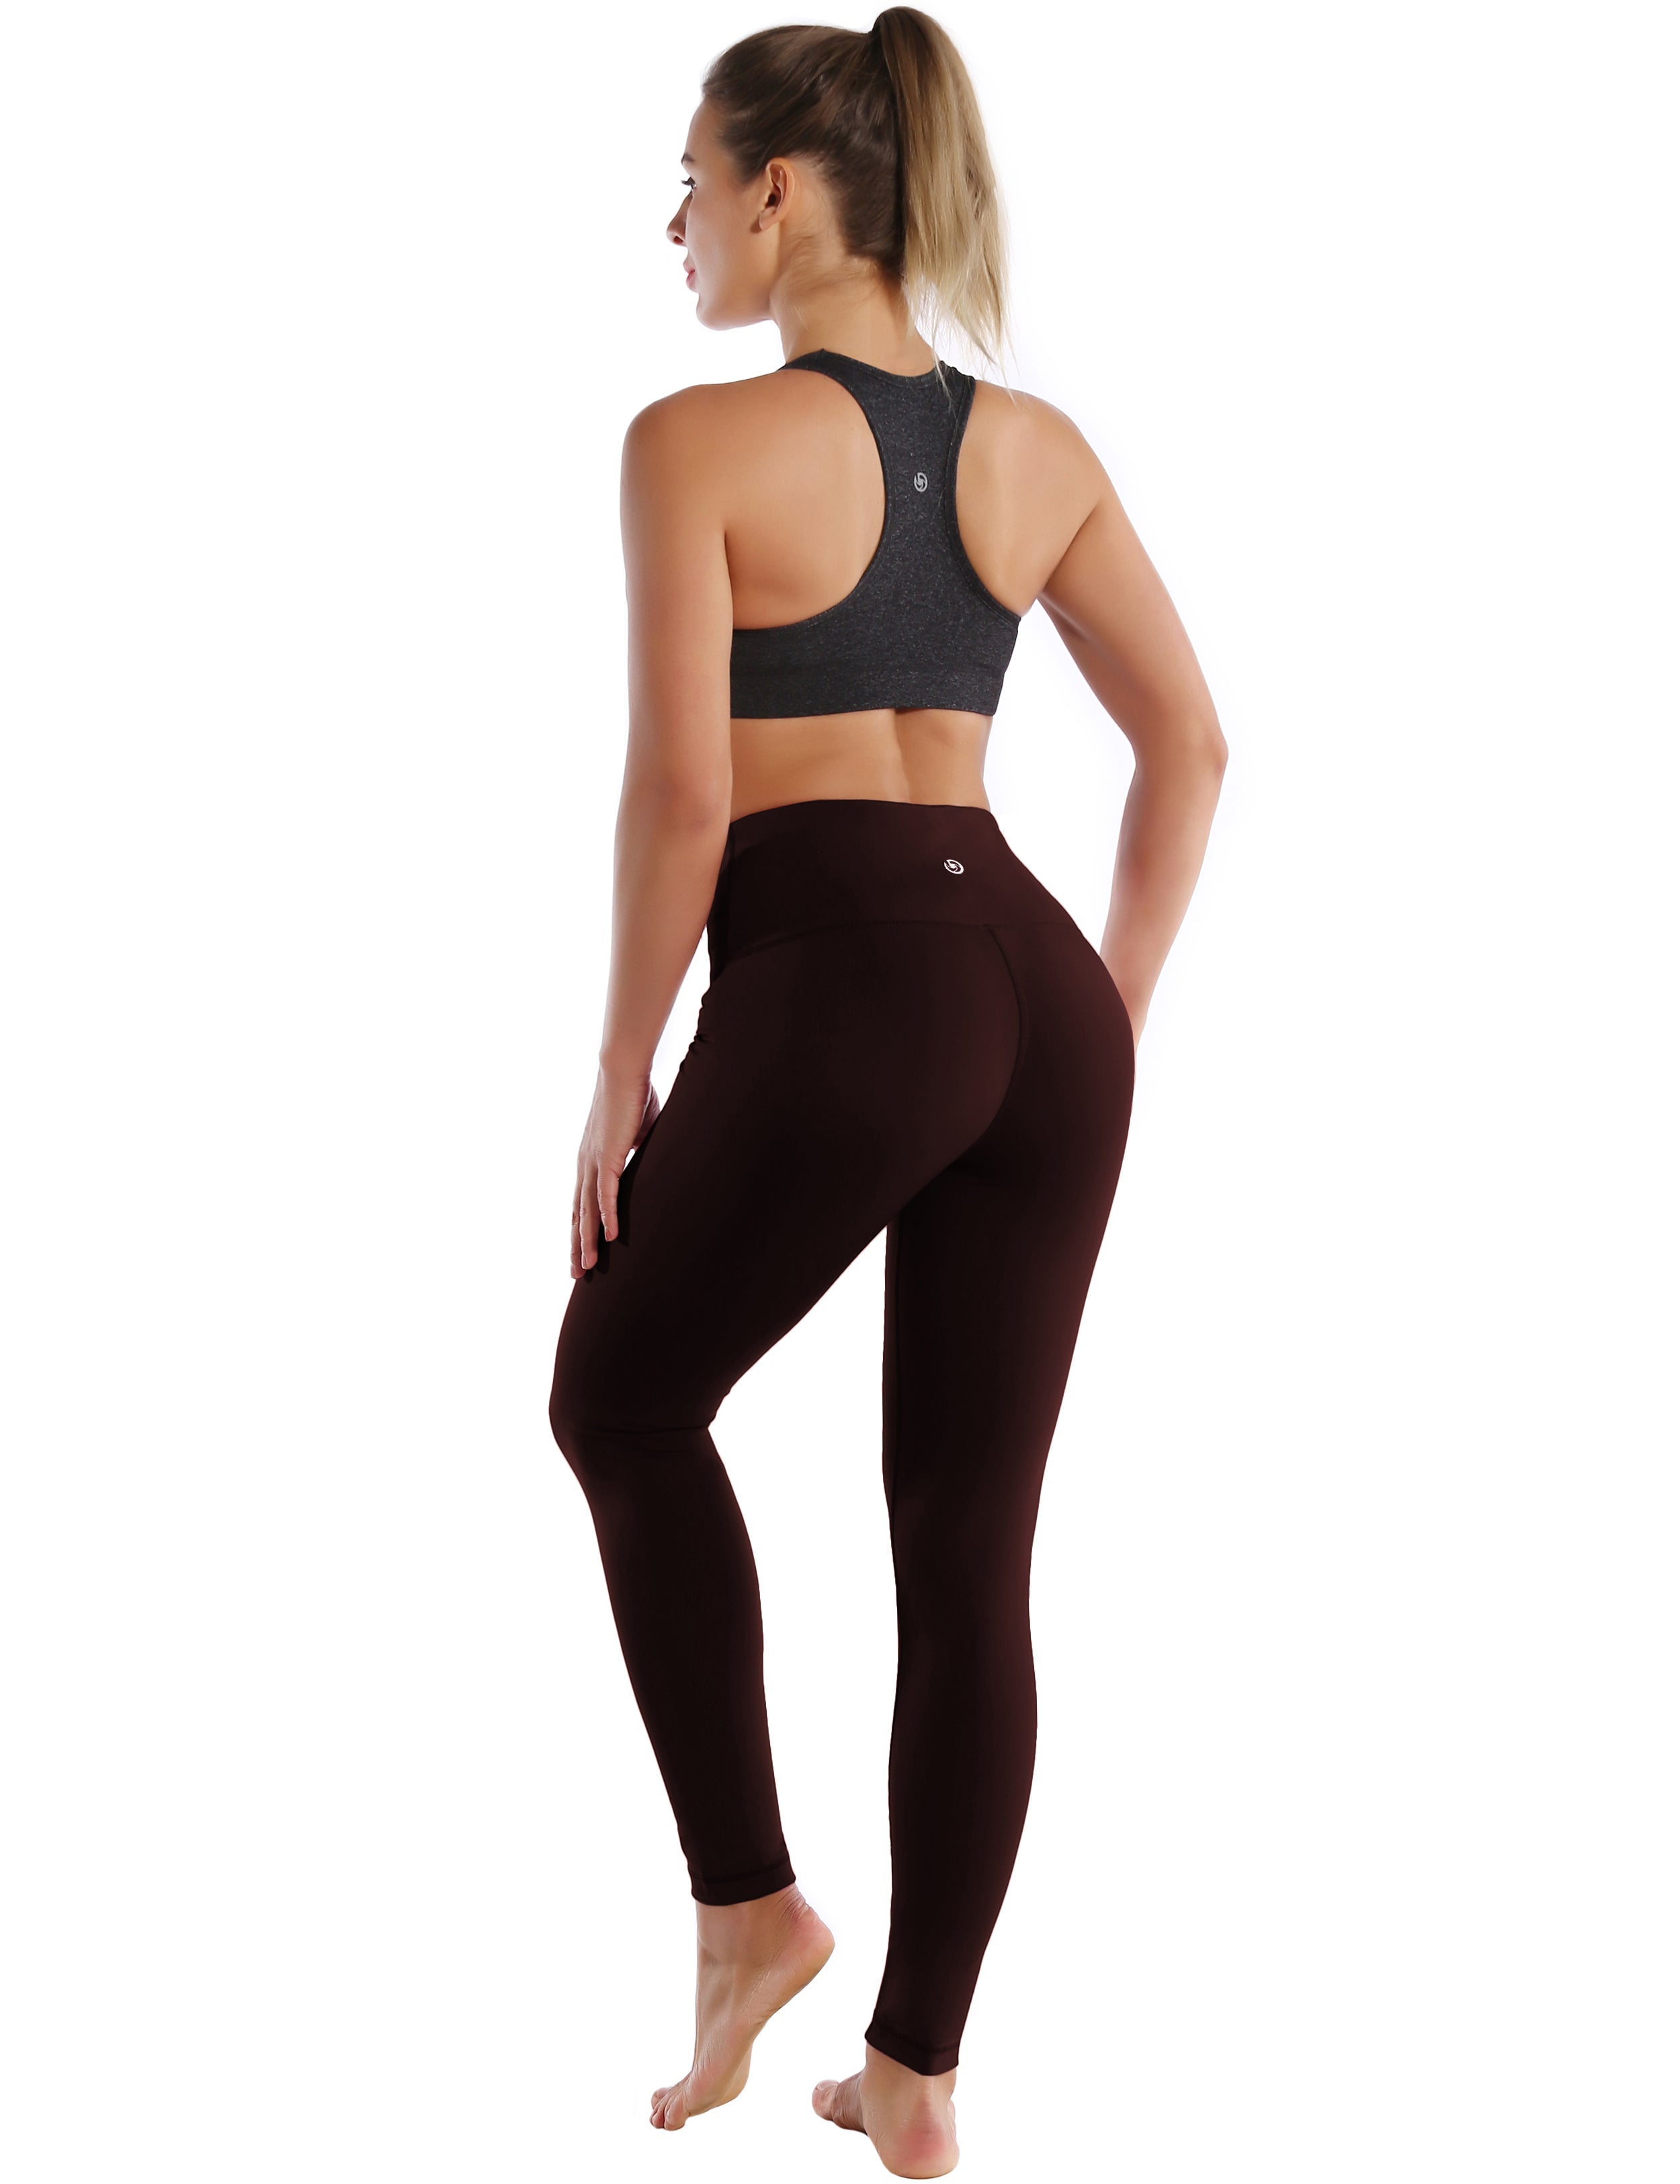 High Waist Gym Pants mahoganymaroon 75%Nylon/25%Spandex Fabric doesn't attract lint easily 4-way stretch No see-through Moisture-wicking Tummy control Inner pocket Four lengths